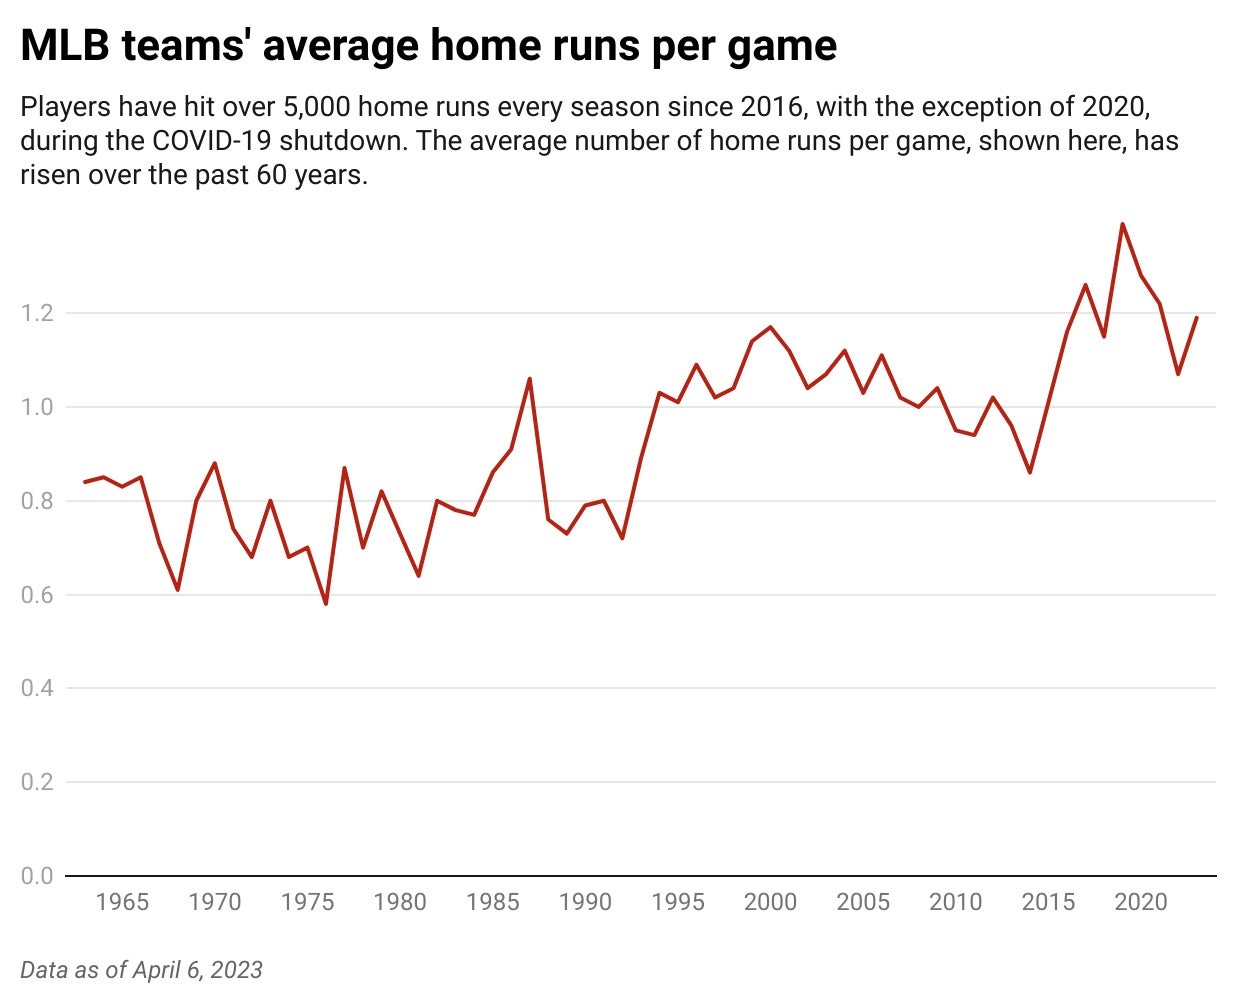 Line chart shows that Major League Baseball teams’ average home runs per game have increased over the past 60 years.